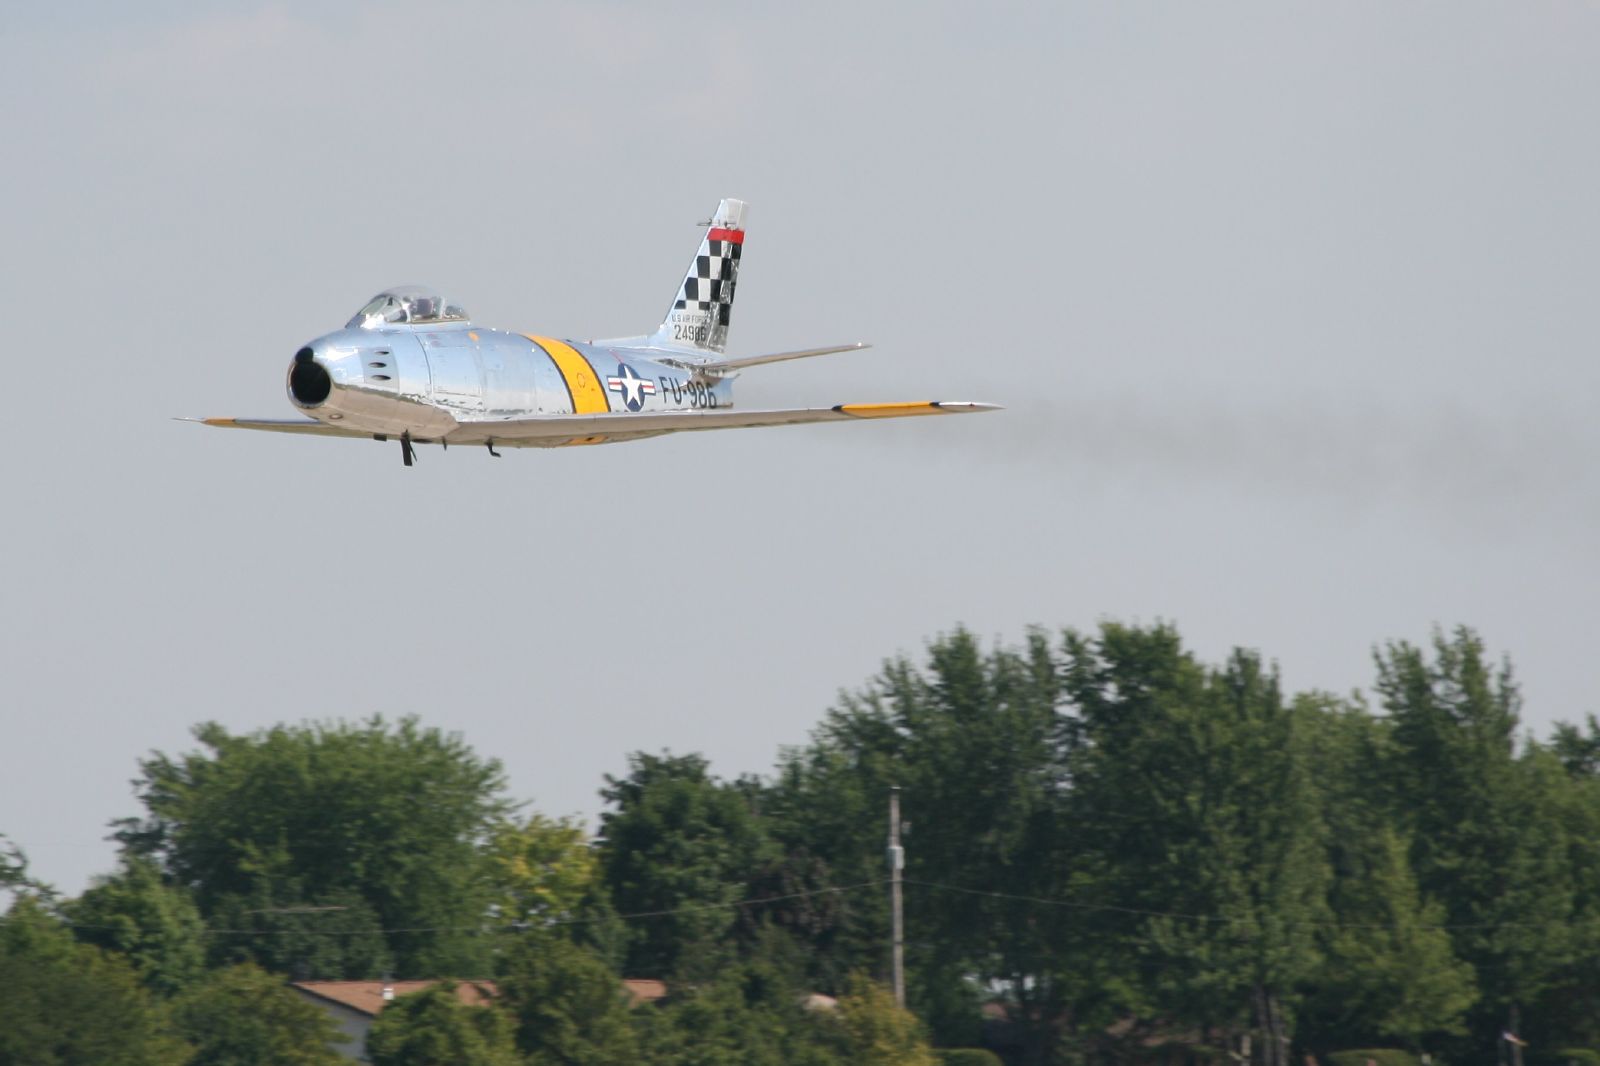 a silver airplane with checkered tail flying above a forest